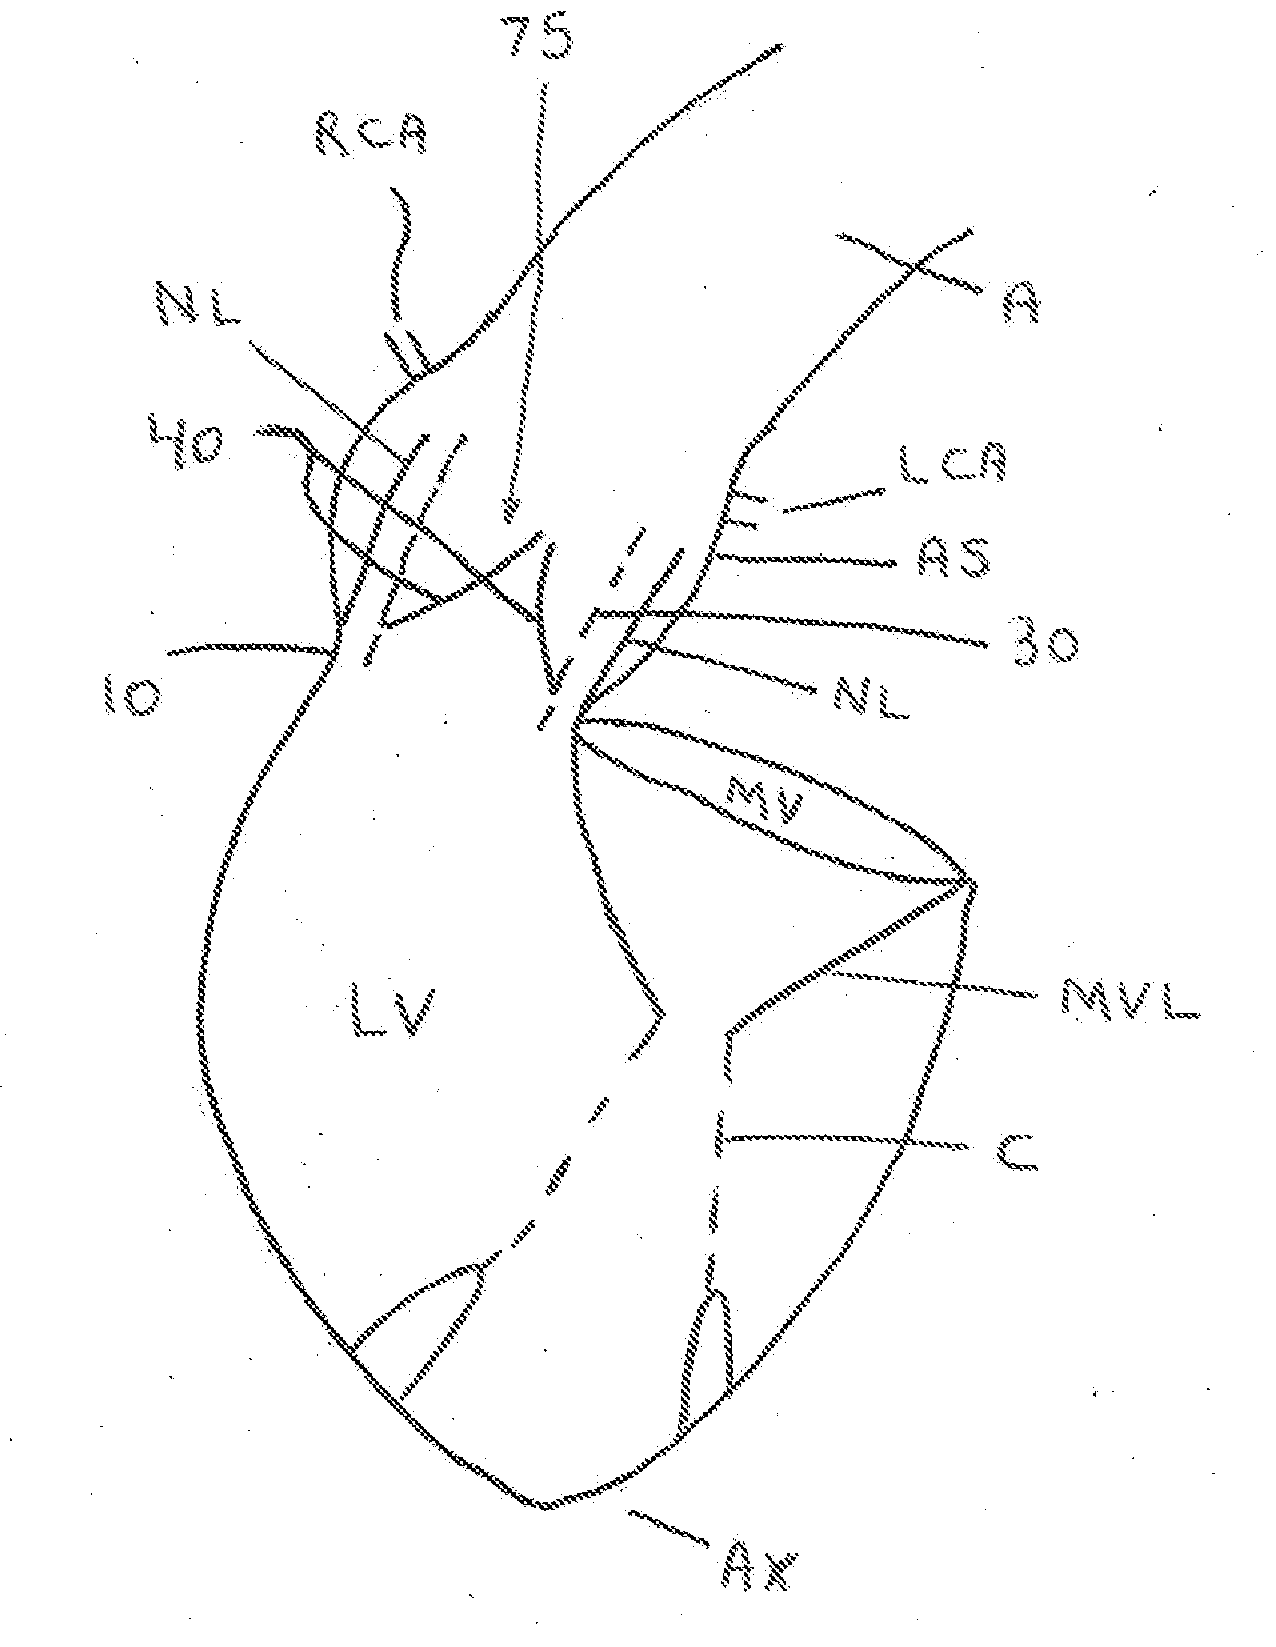 Oval Aortic Valve